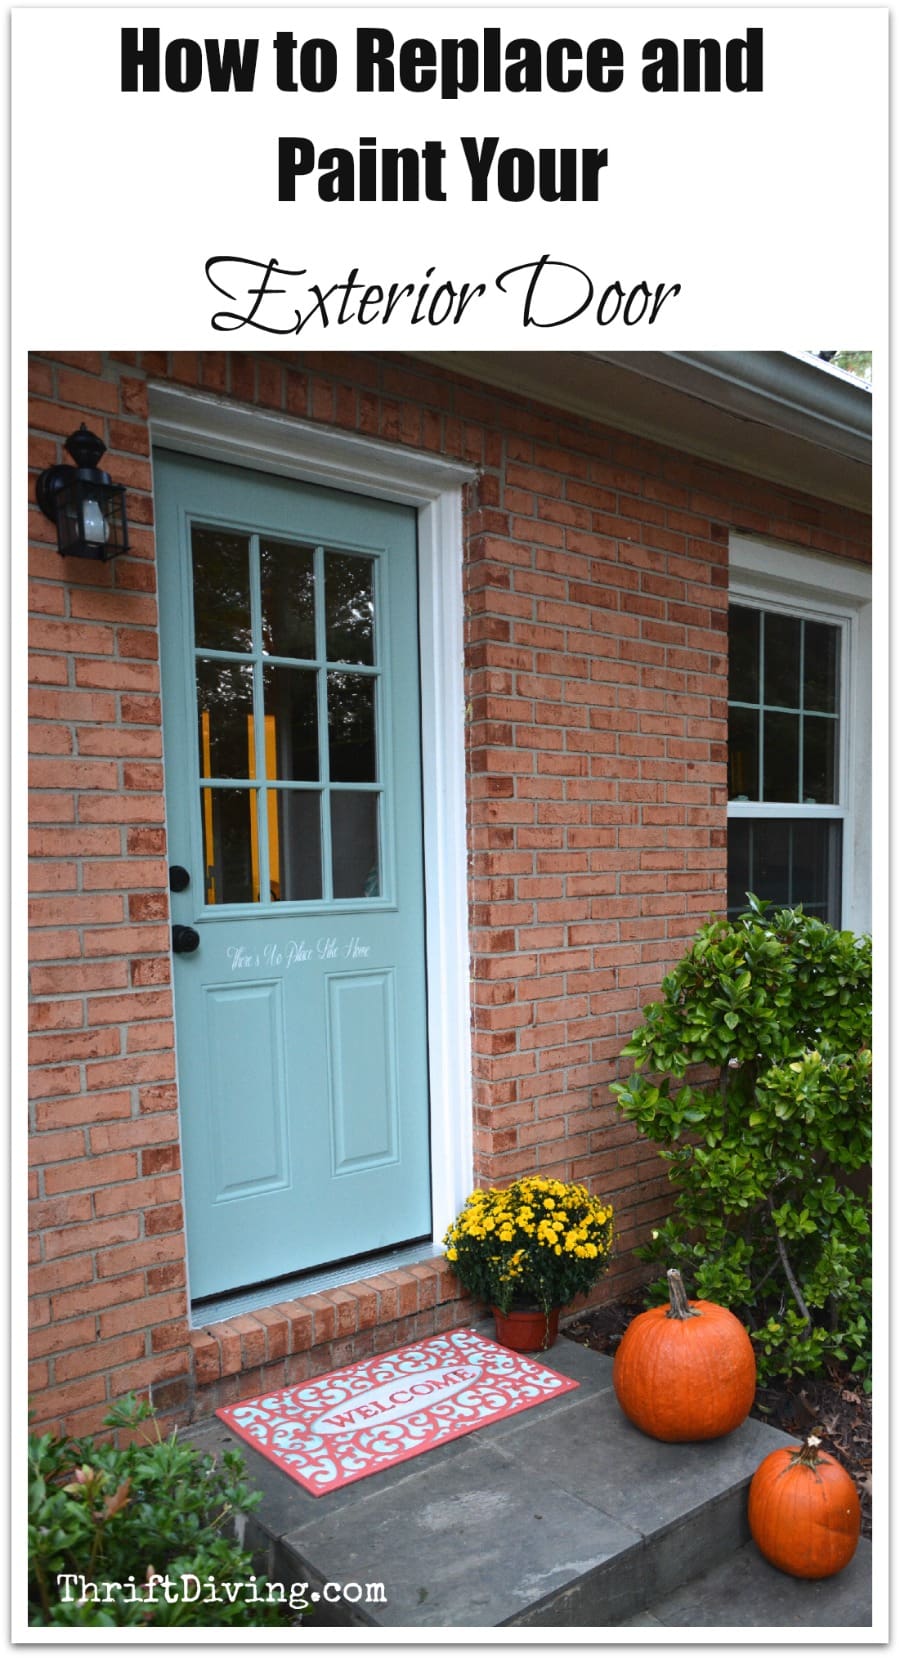 How to Replace and Paint Your Exterior Door - Step-by-step instructions to help you get it right! - ThriftDiving.com